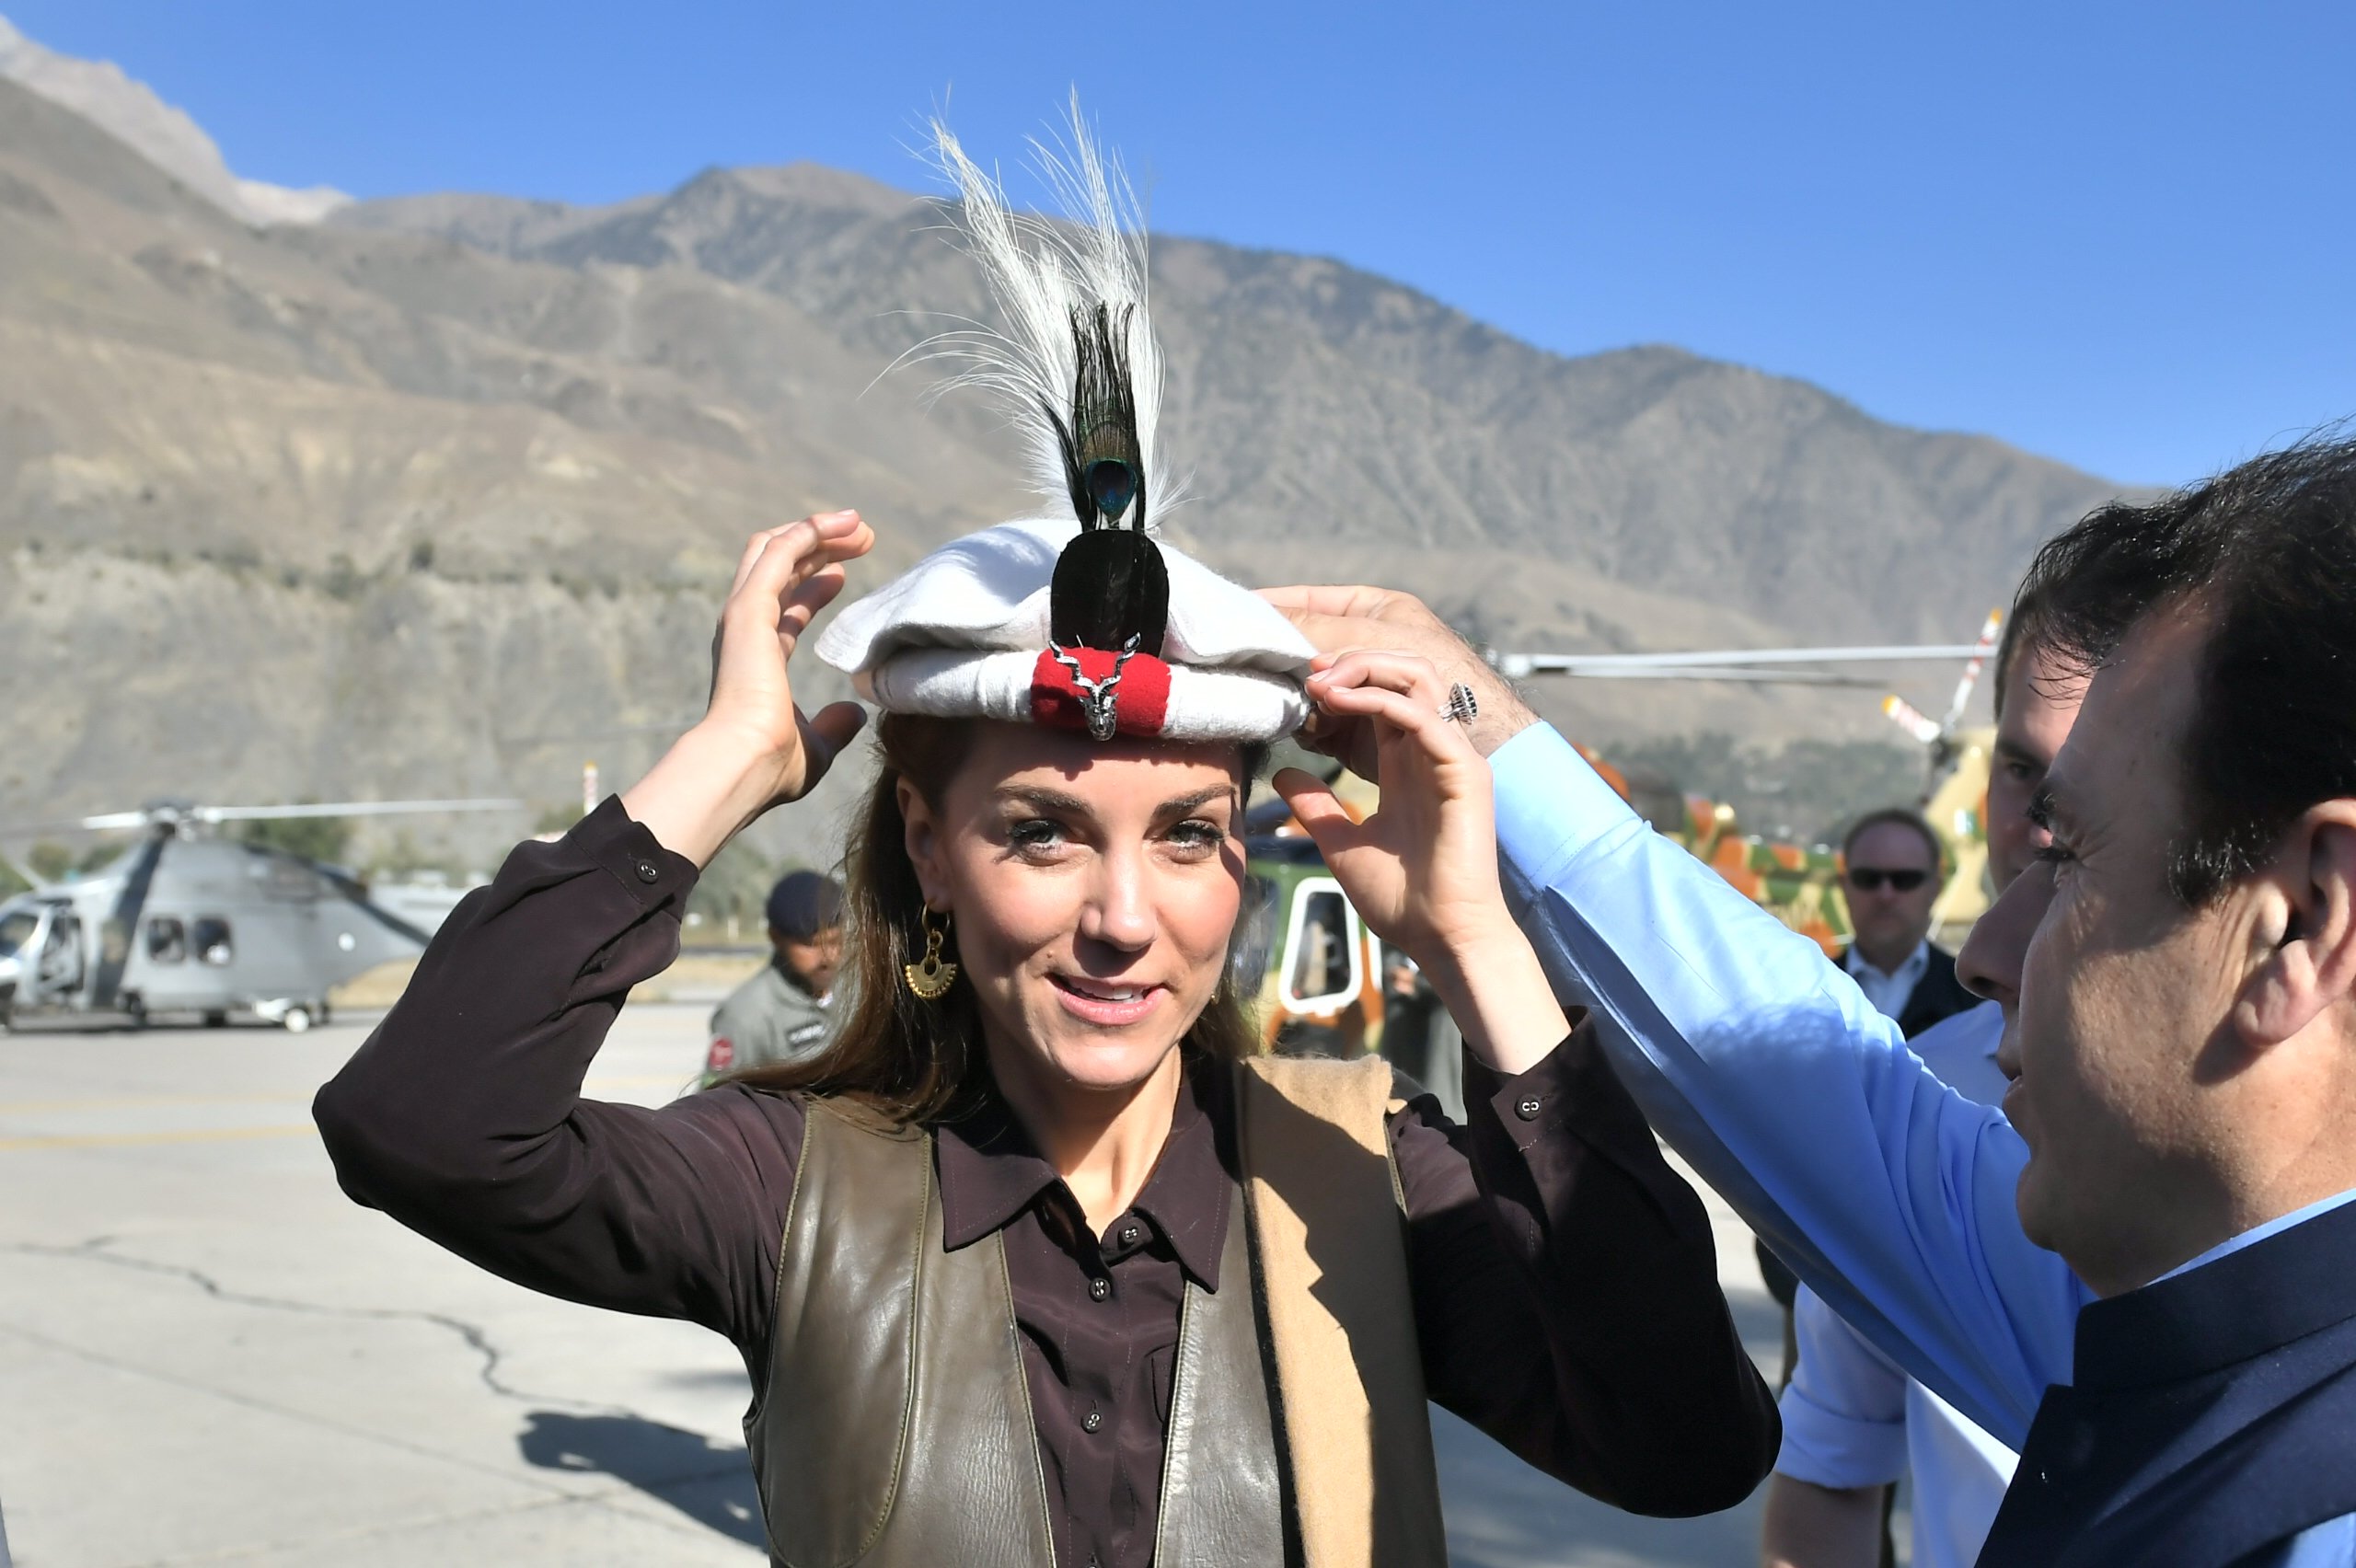 Prince William and Kate Middleton are welcomed as they arrive by helicopter on October 16, 2019, in Chitral, Pakistan. | Source: Getty Images.